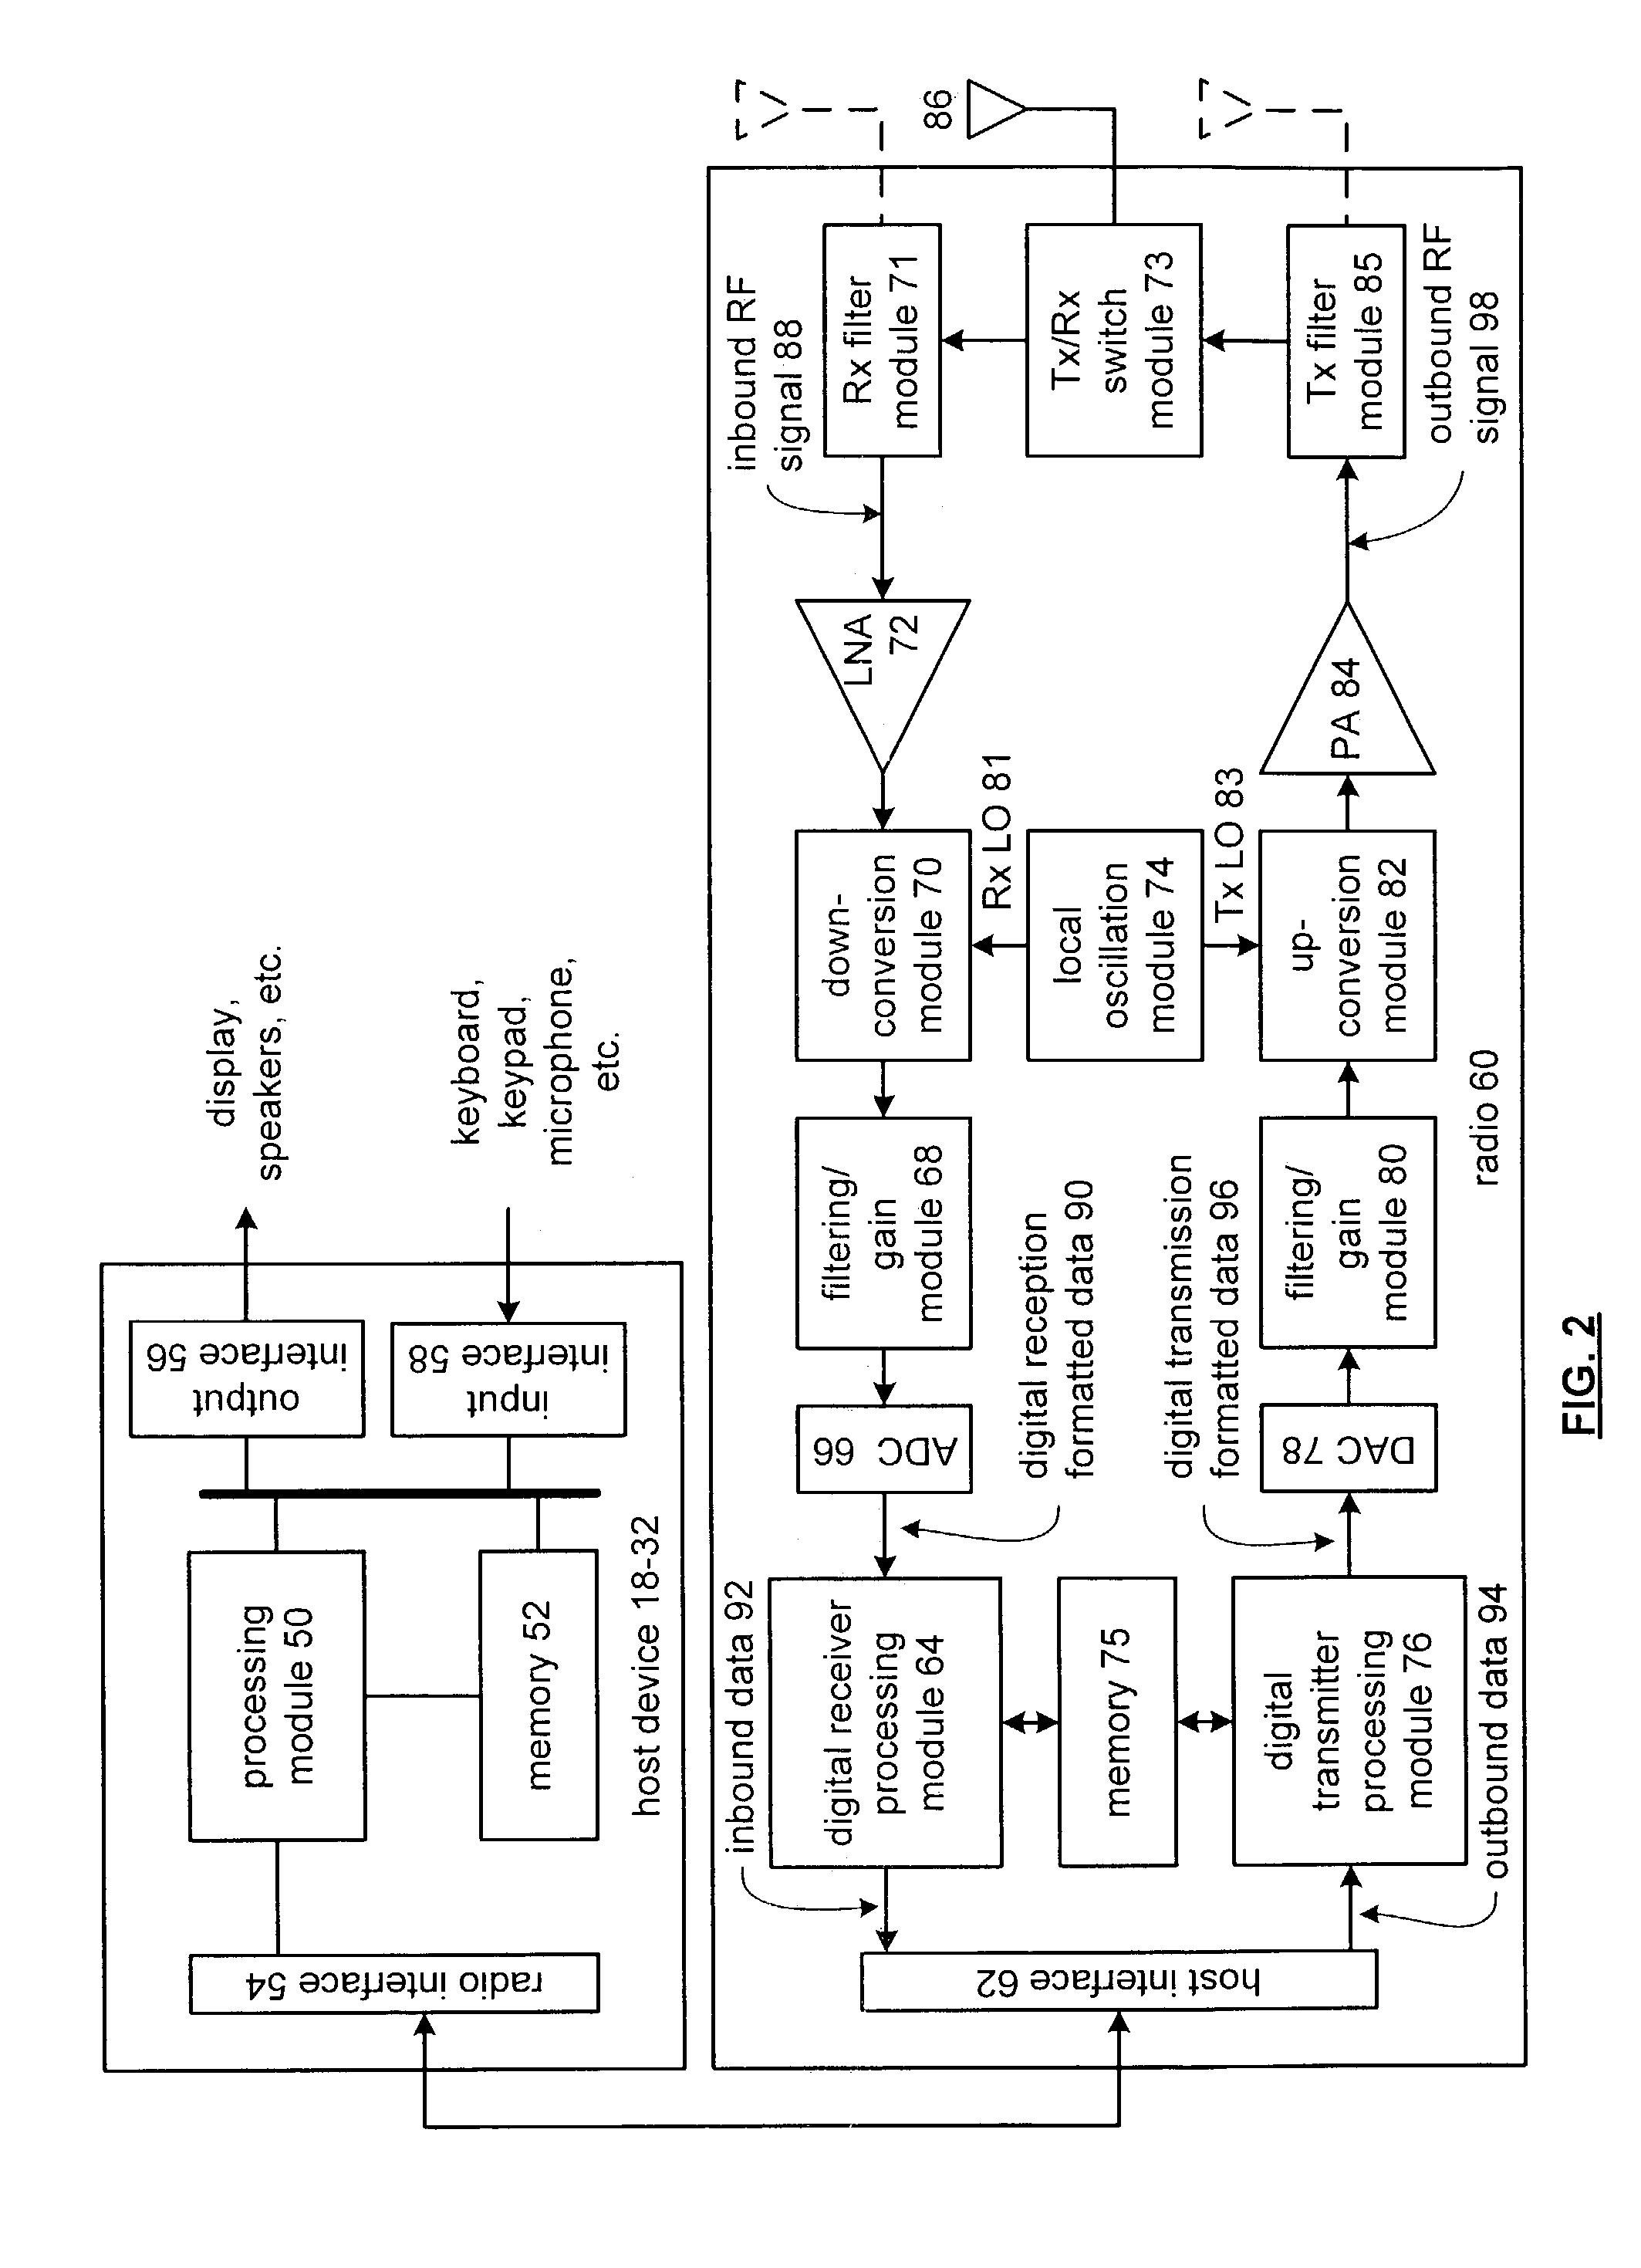 On-chip loop filter for use in a phase locked loop and other applications